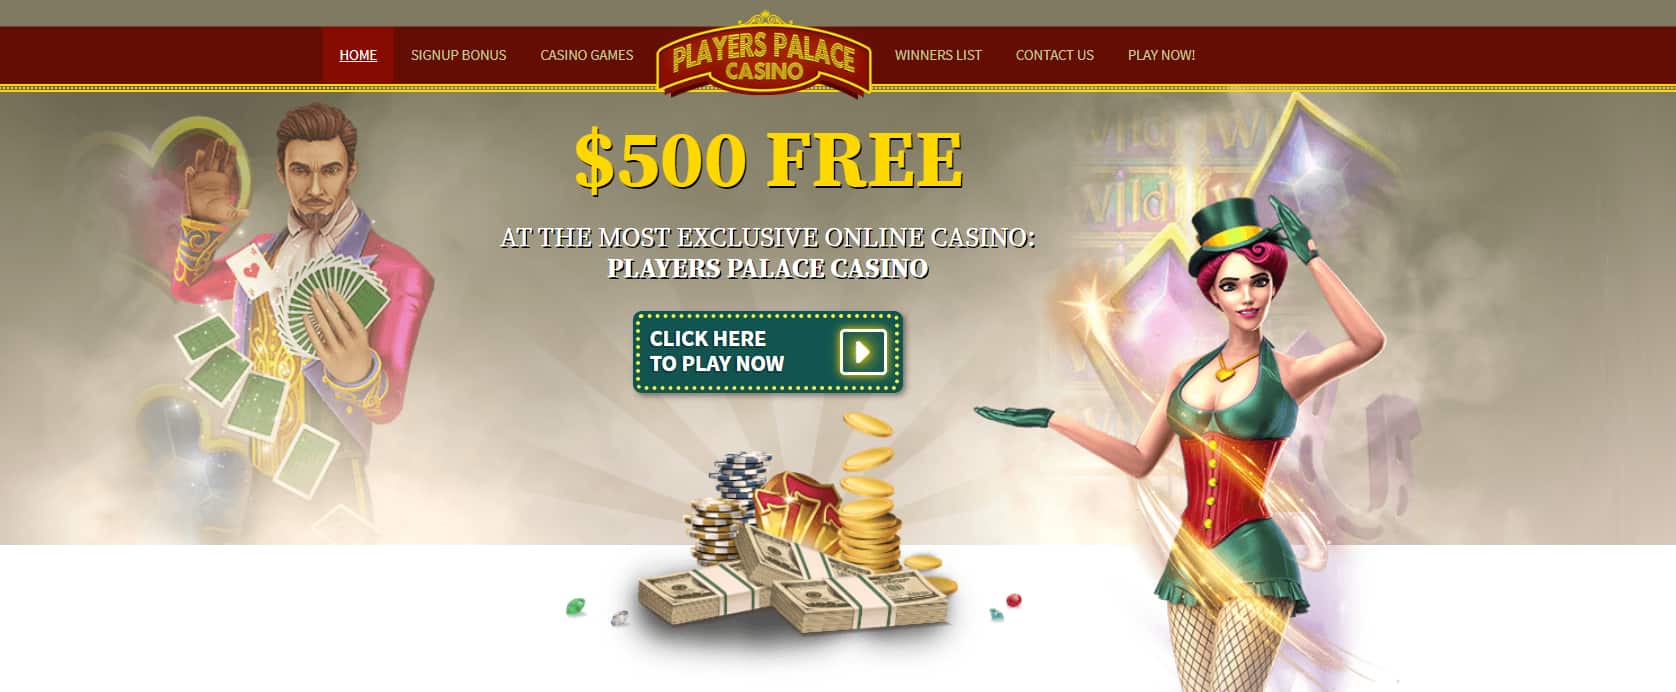 players palace casino review